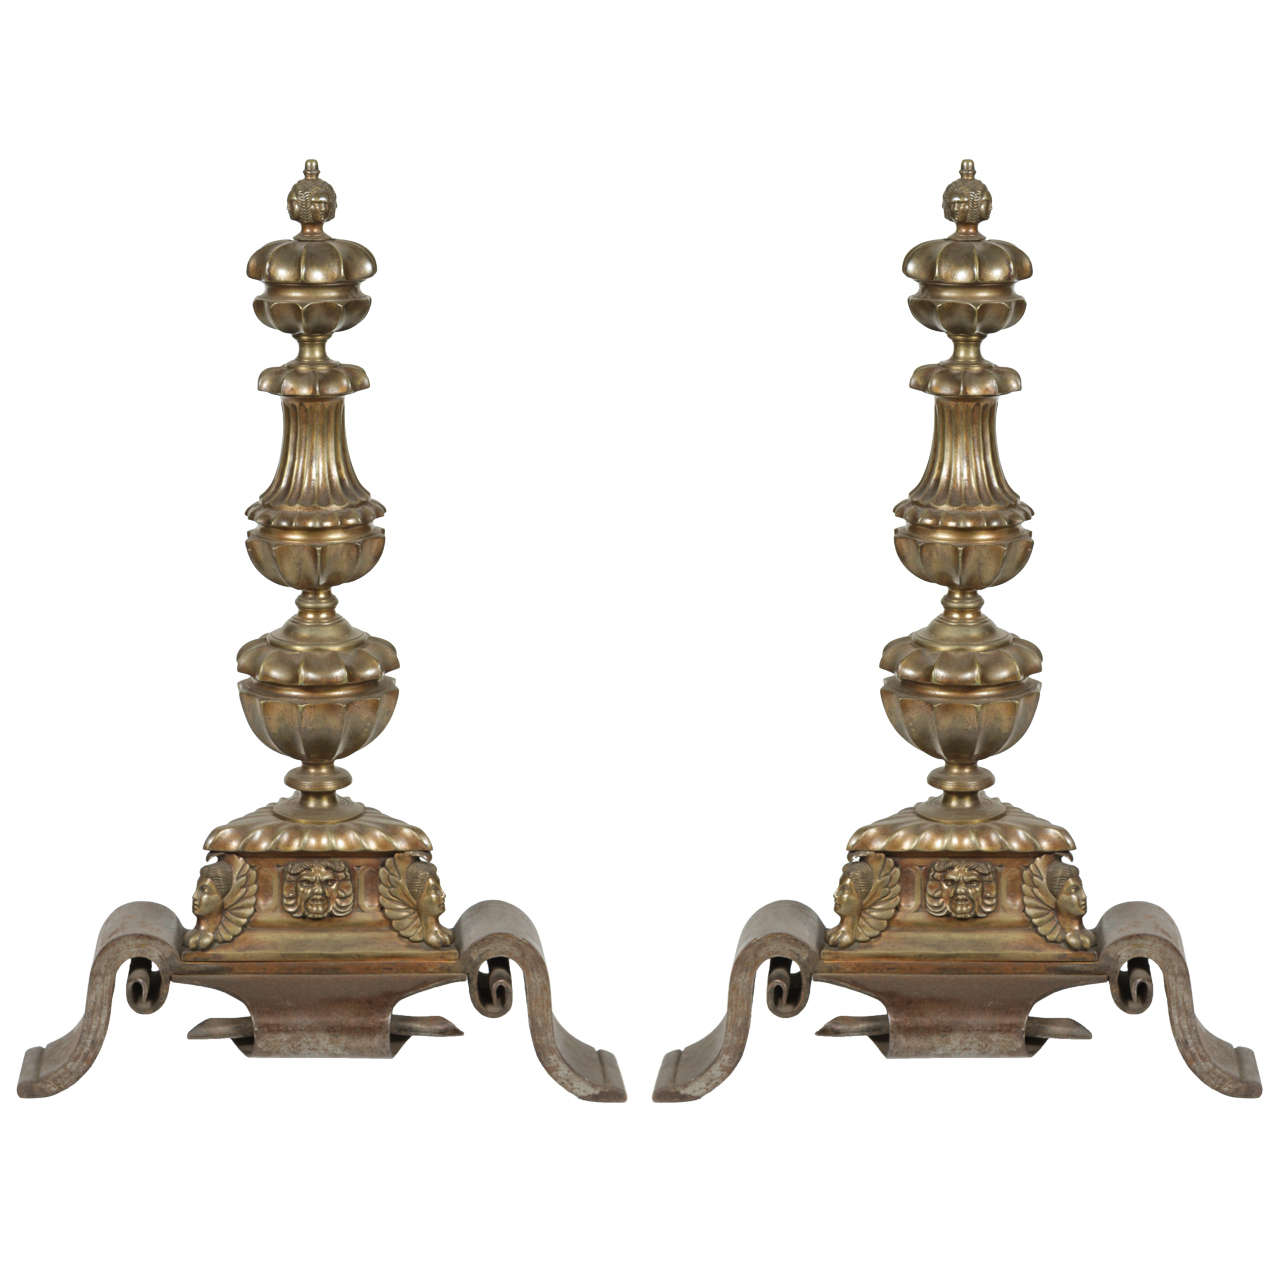 Pair of Bronze and Cast Iron Figural Andirons